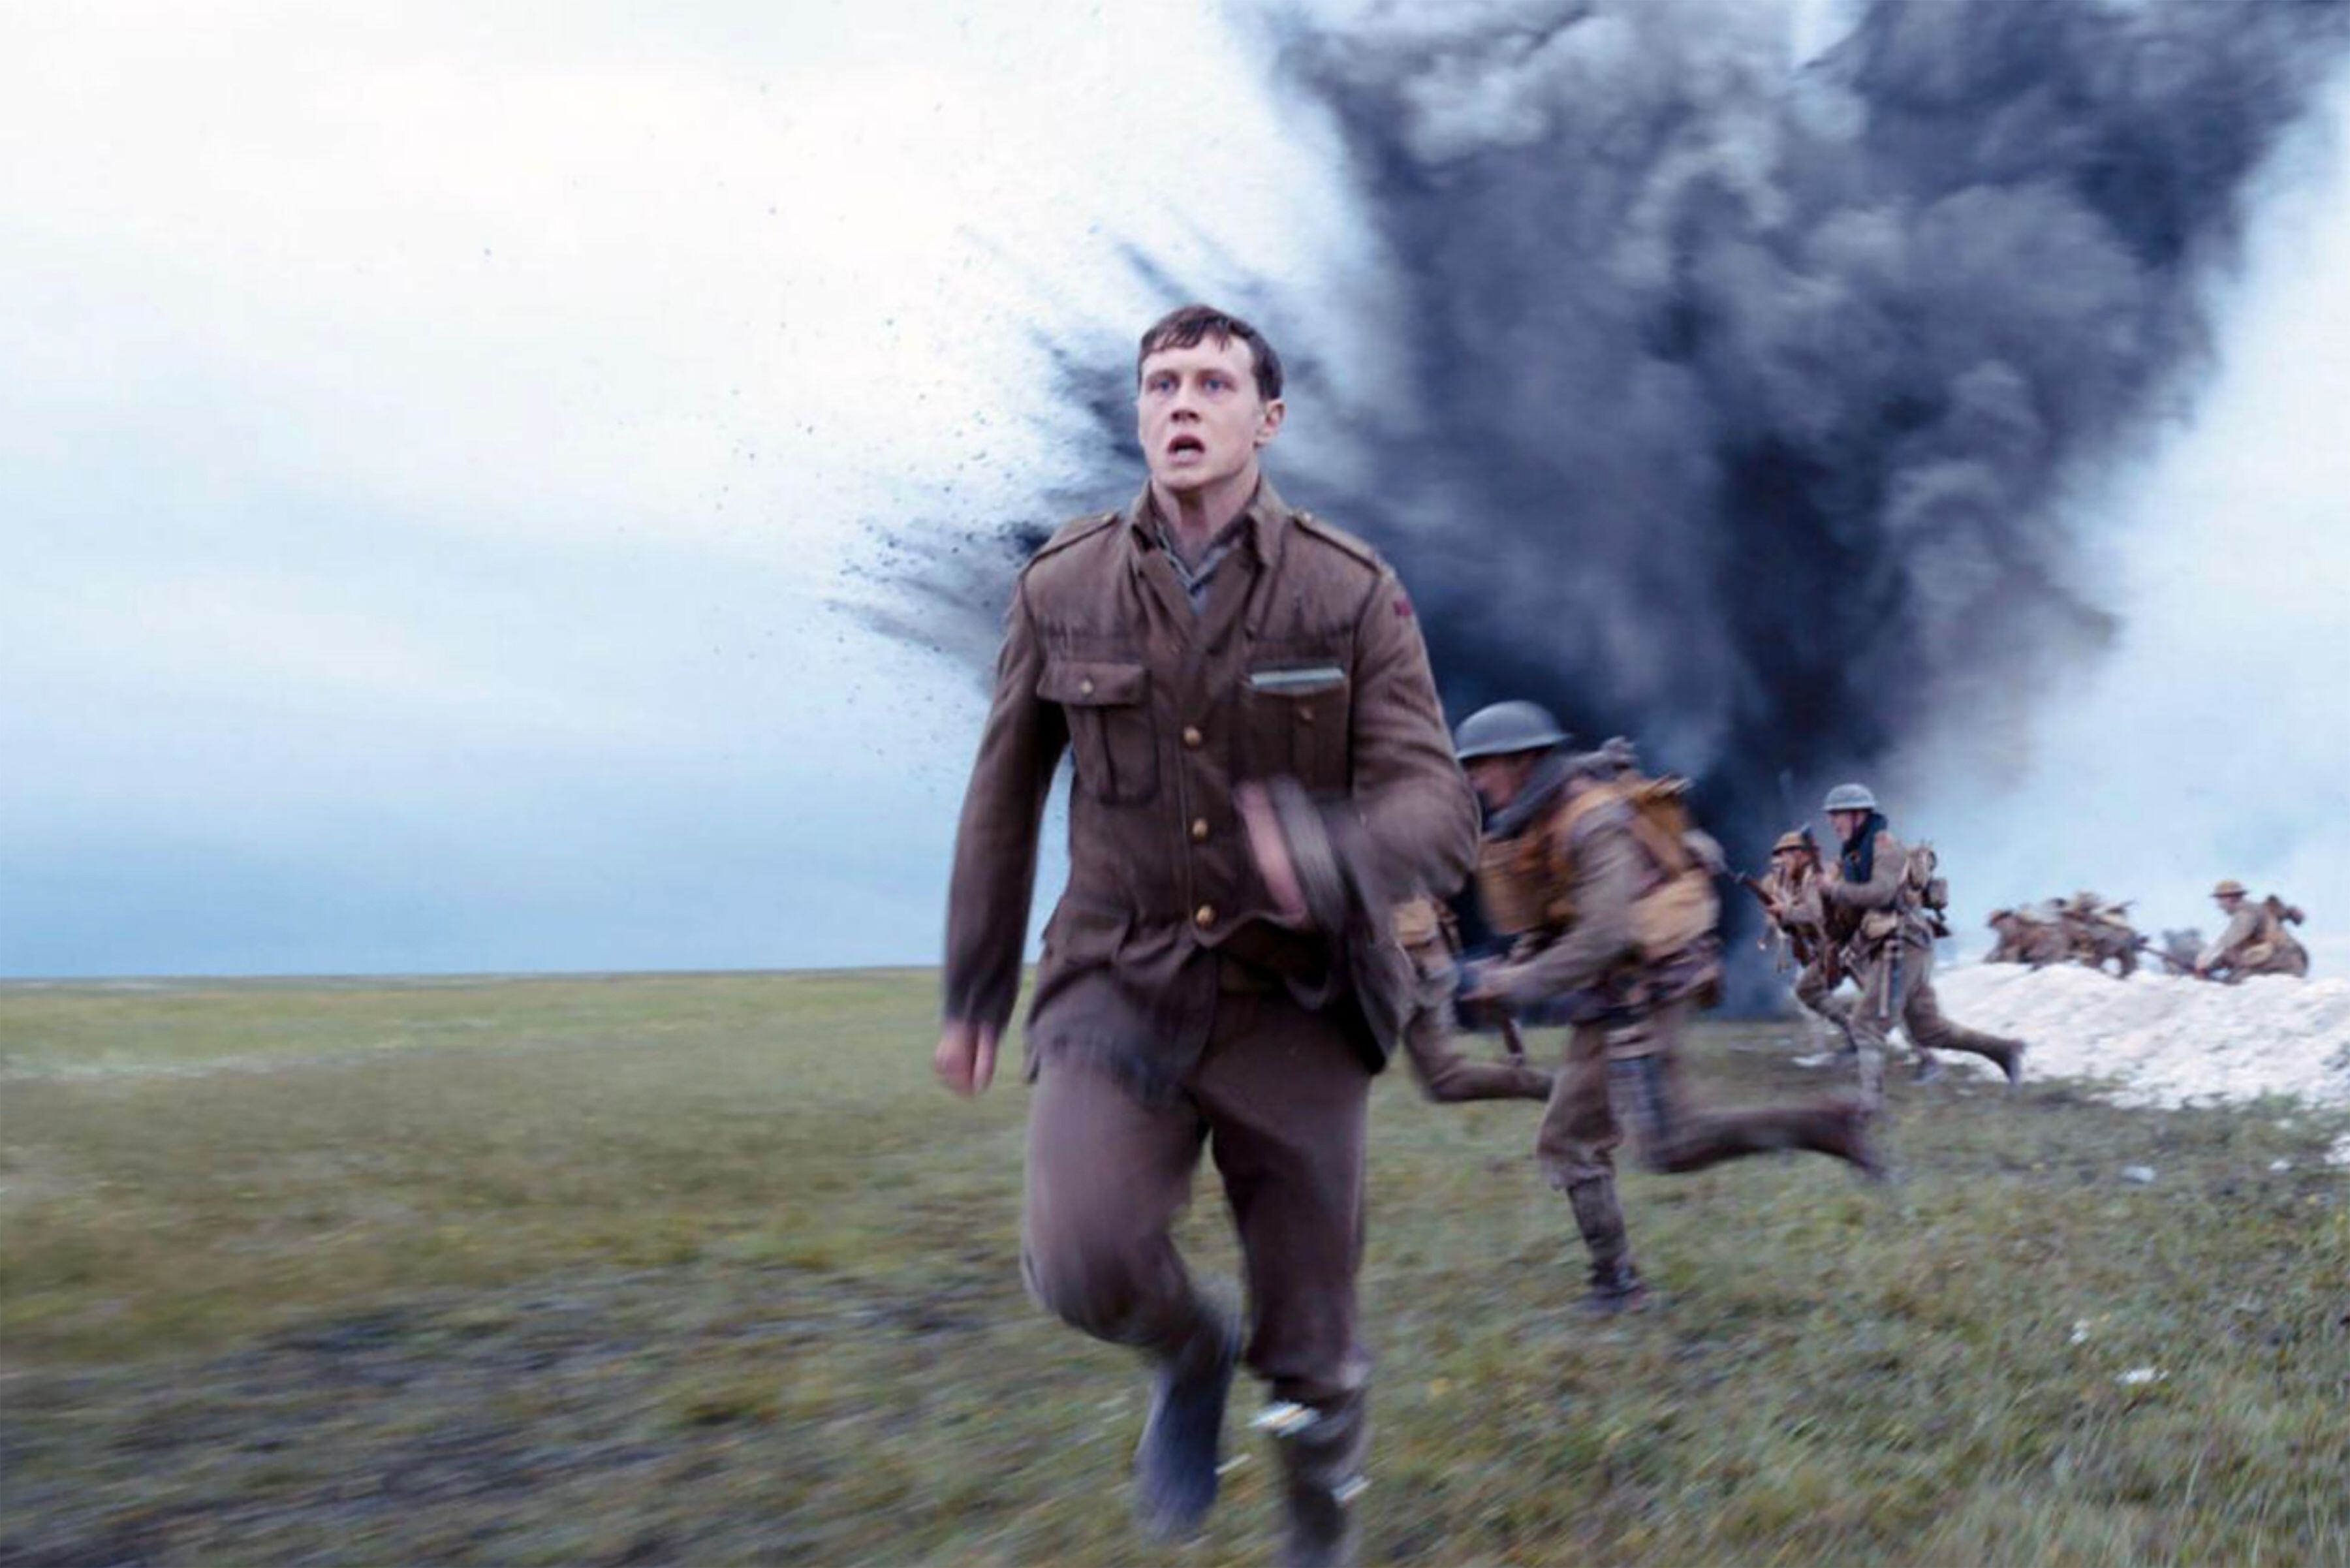 A British World War I soldier sprints across a field in the midst of explosive combat